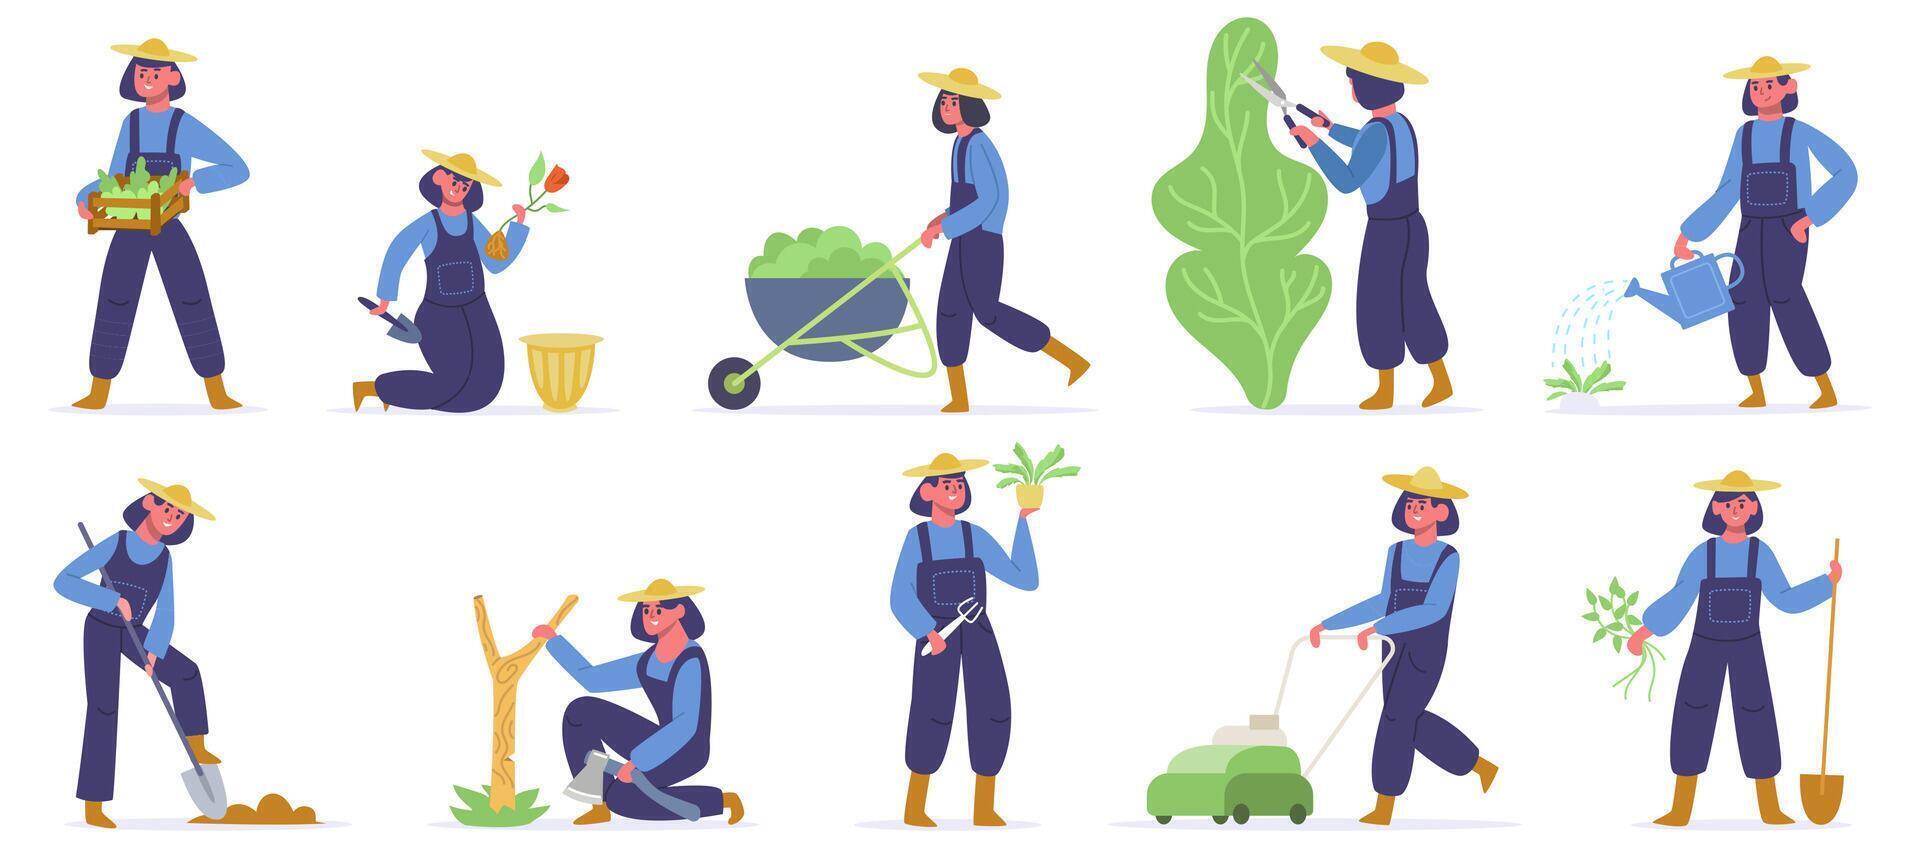 Garden worker. Female gardener planting, watering and growing sprouts, garden job with farming tools. Agriculture gardener vector illustrations